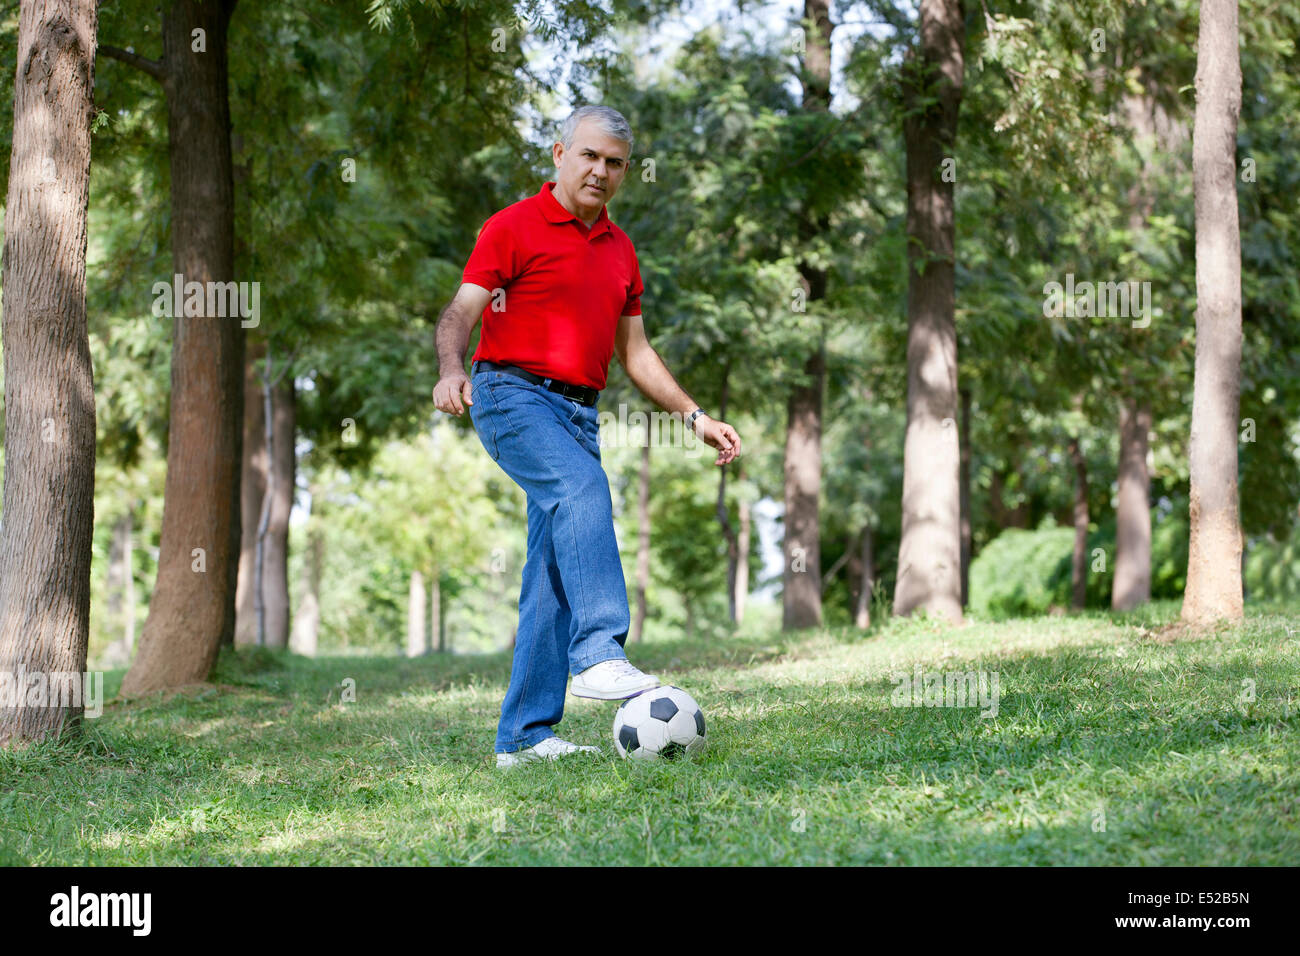 Portrait of a senior man playing soccer Stock Photo